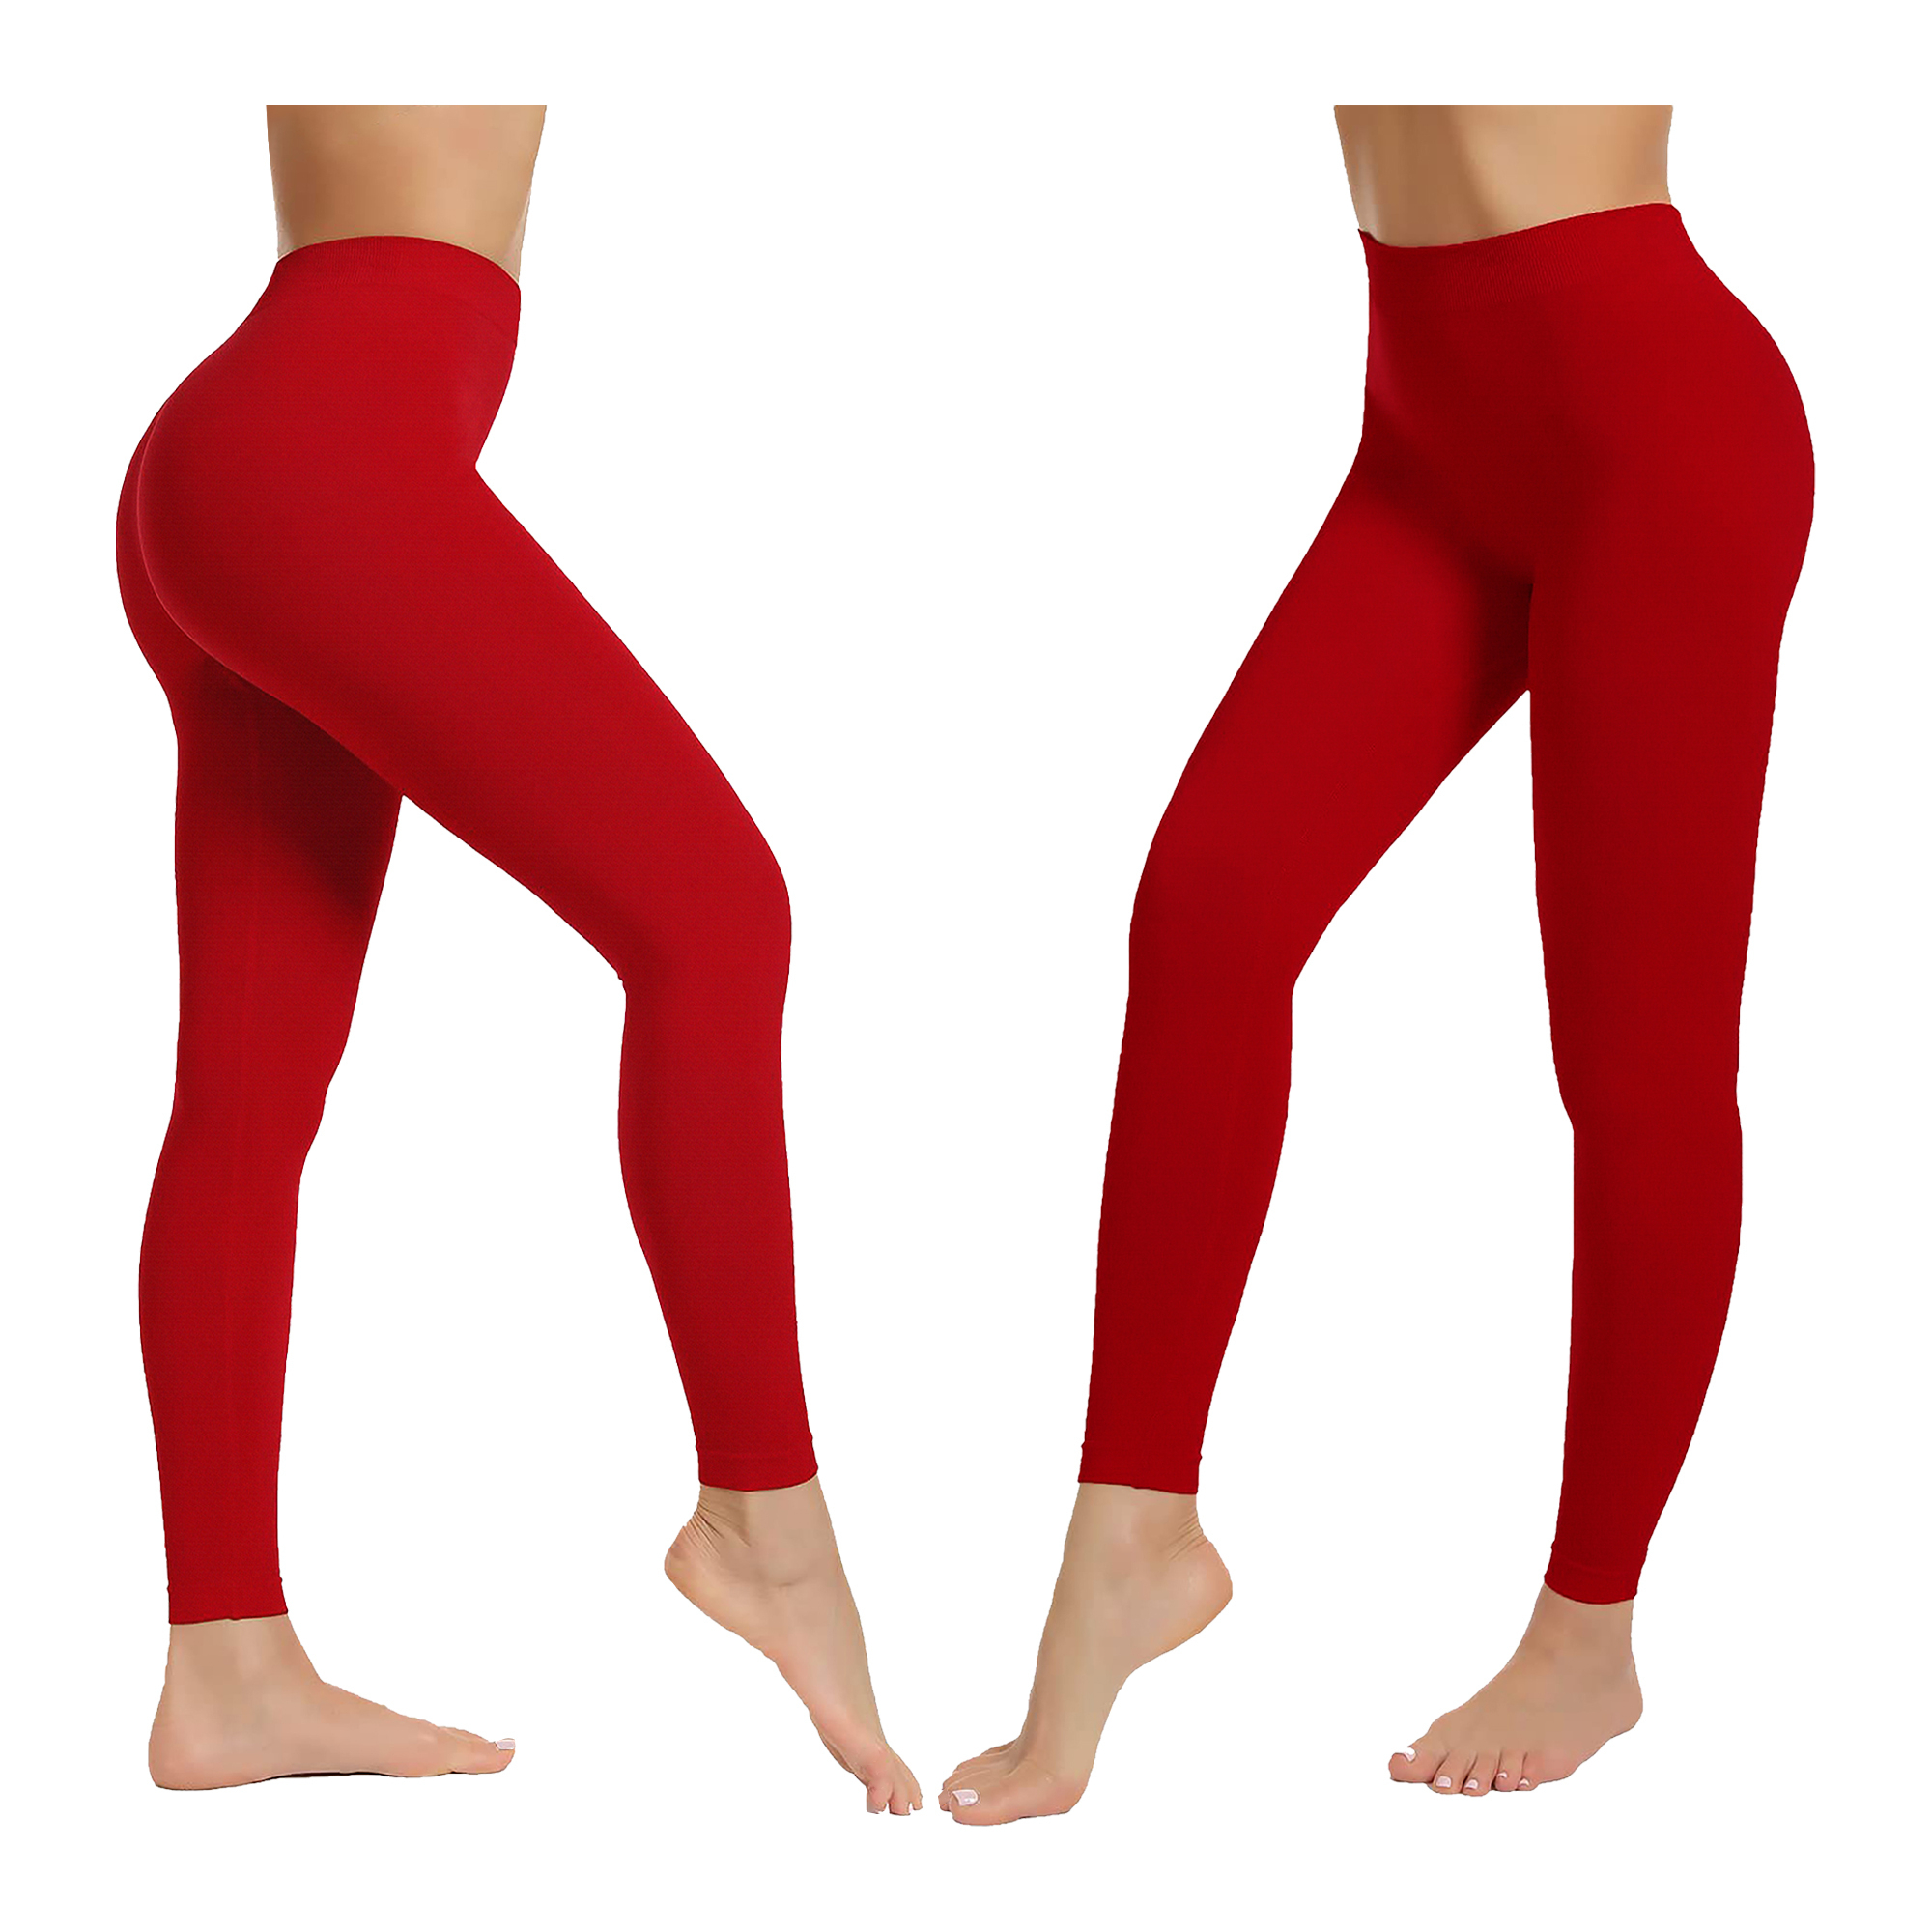 3-Pack: Women's High-Waist Ultra-Soft Stretchy Solid Fitness Yoga Leggings Pants - RED, S